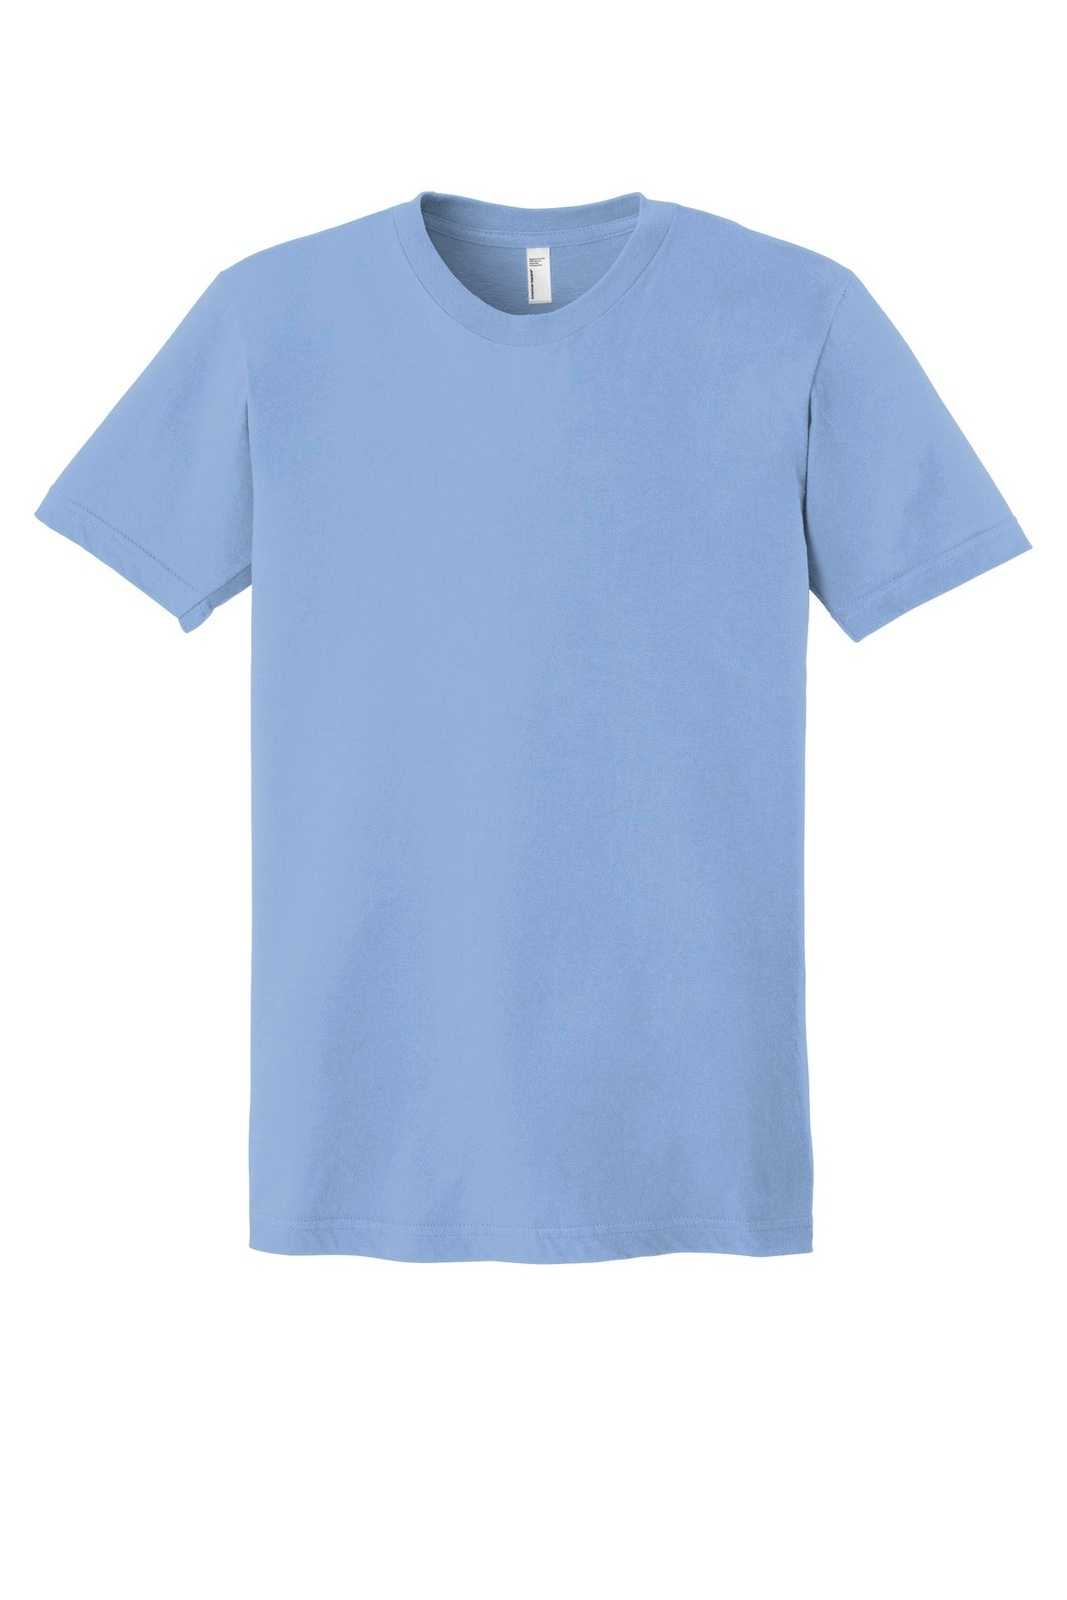 American Apparel 2001 USA Collection Fine Jersey T-Shirt - Baby Blue - HIT a Double